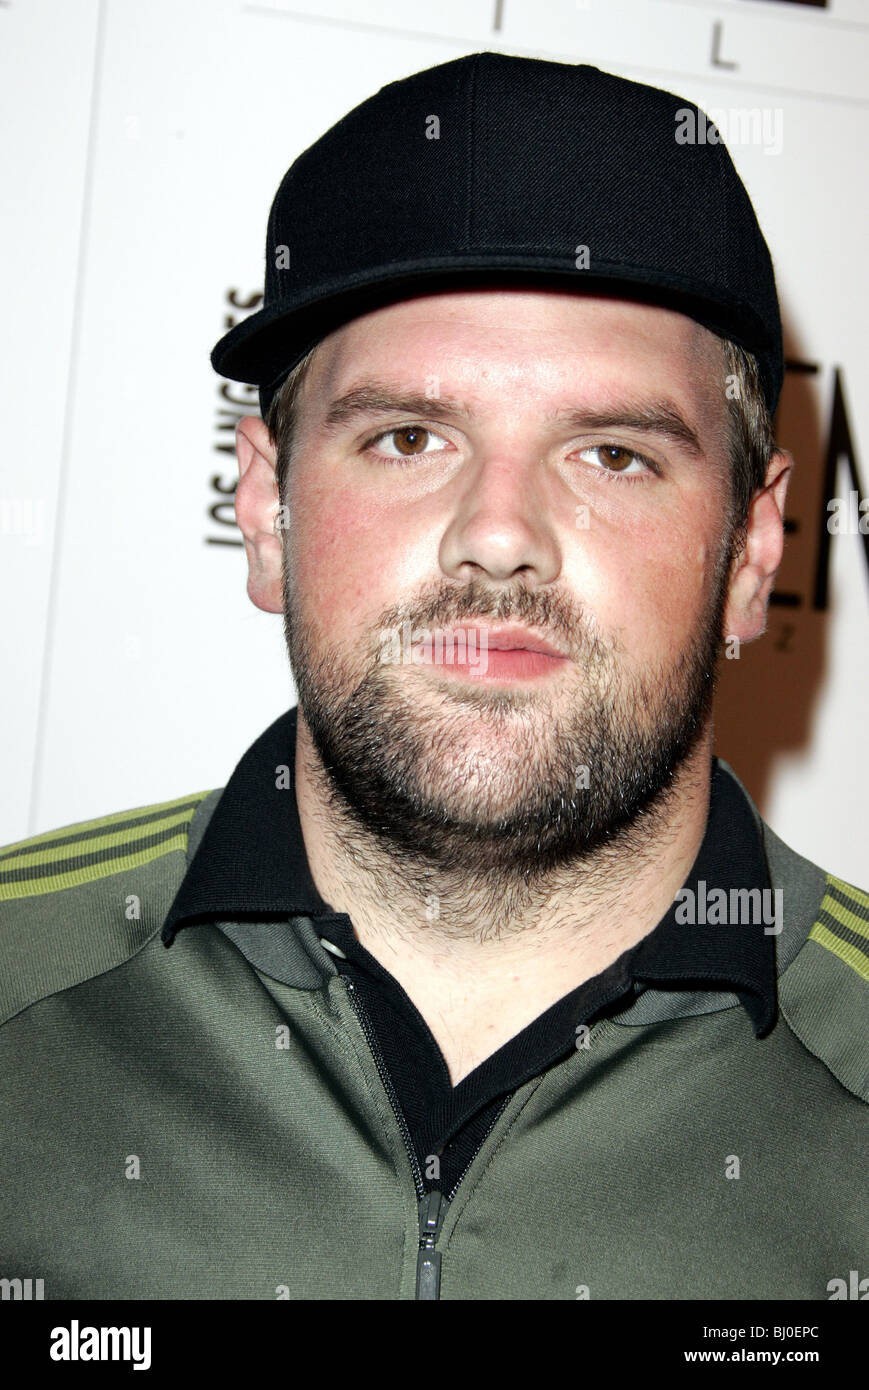 ETHAN SUPLEE SCHAUSPIELER CHINESE THEATRE HOLLYWOOD LOS ANGELES USA 20.09.2005 Stockfoto